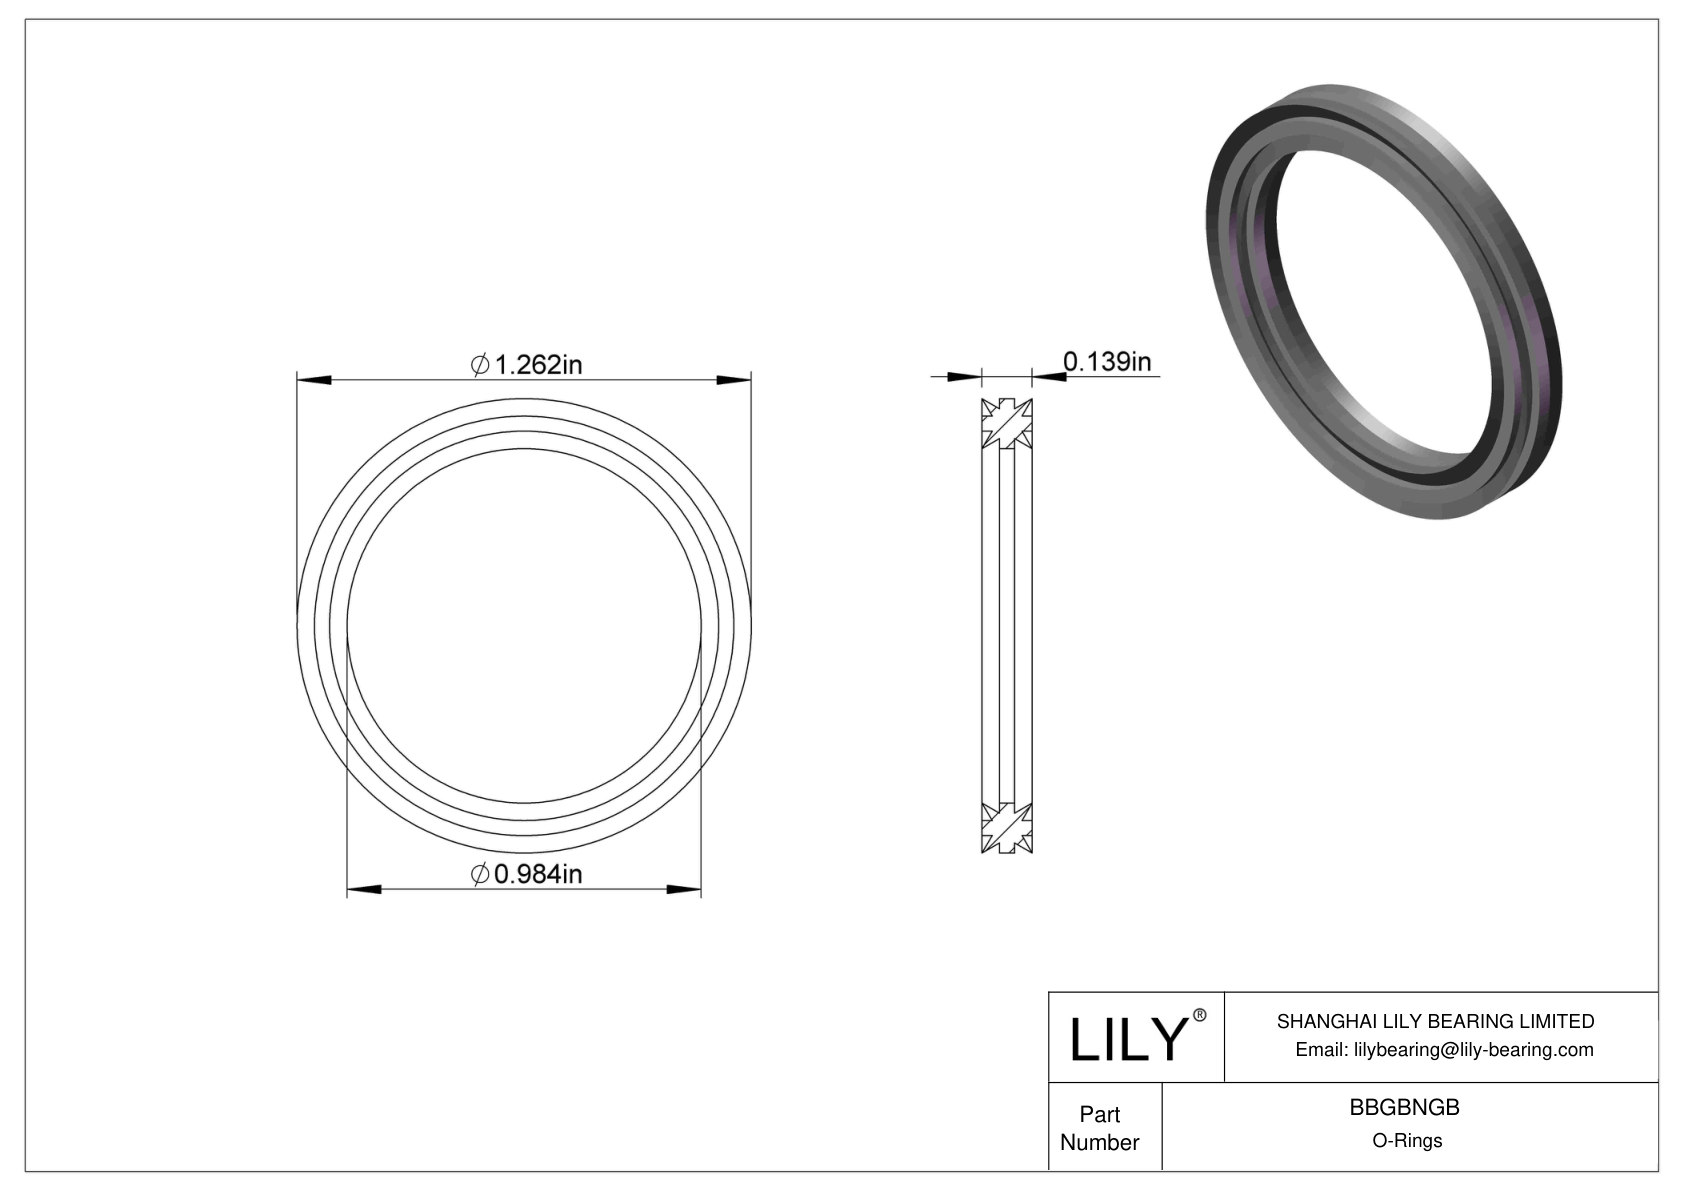 BBGBNGB Oil Resistant O-Rings Double X cad drawing